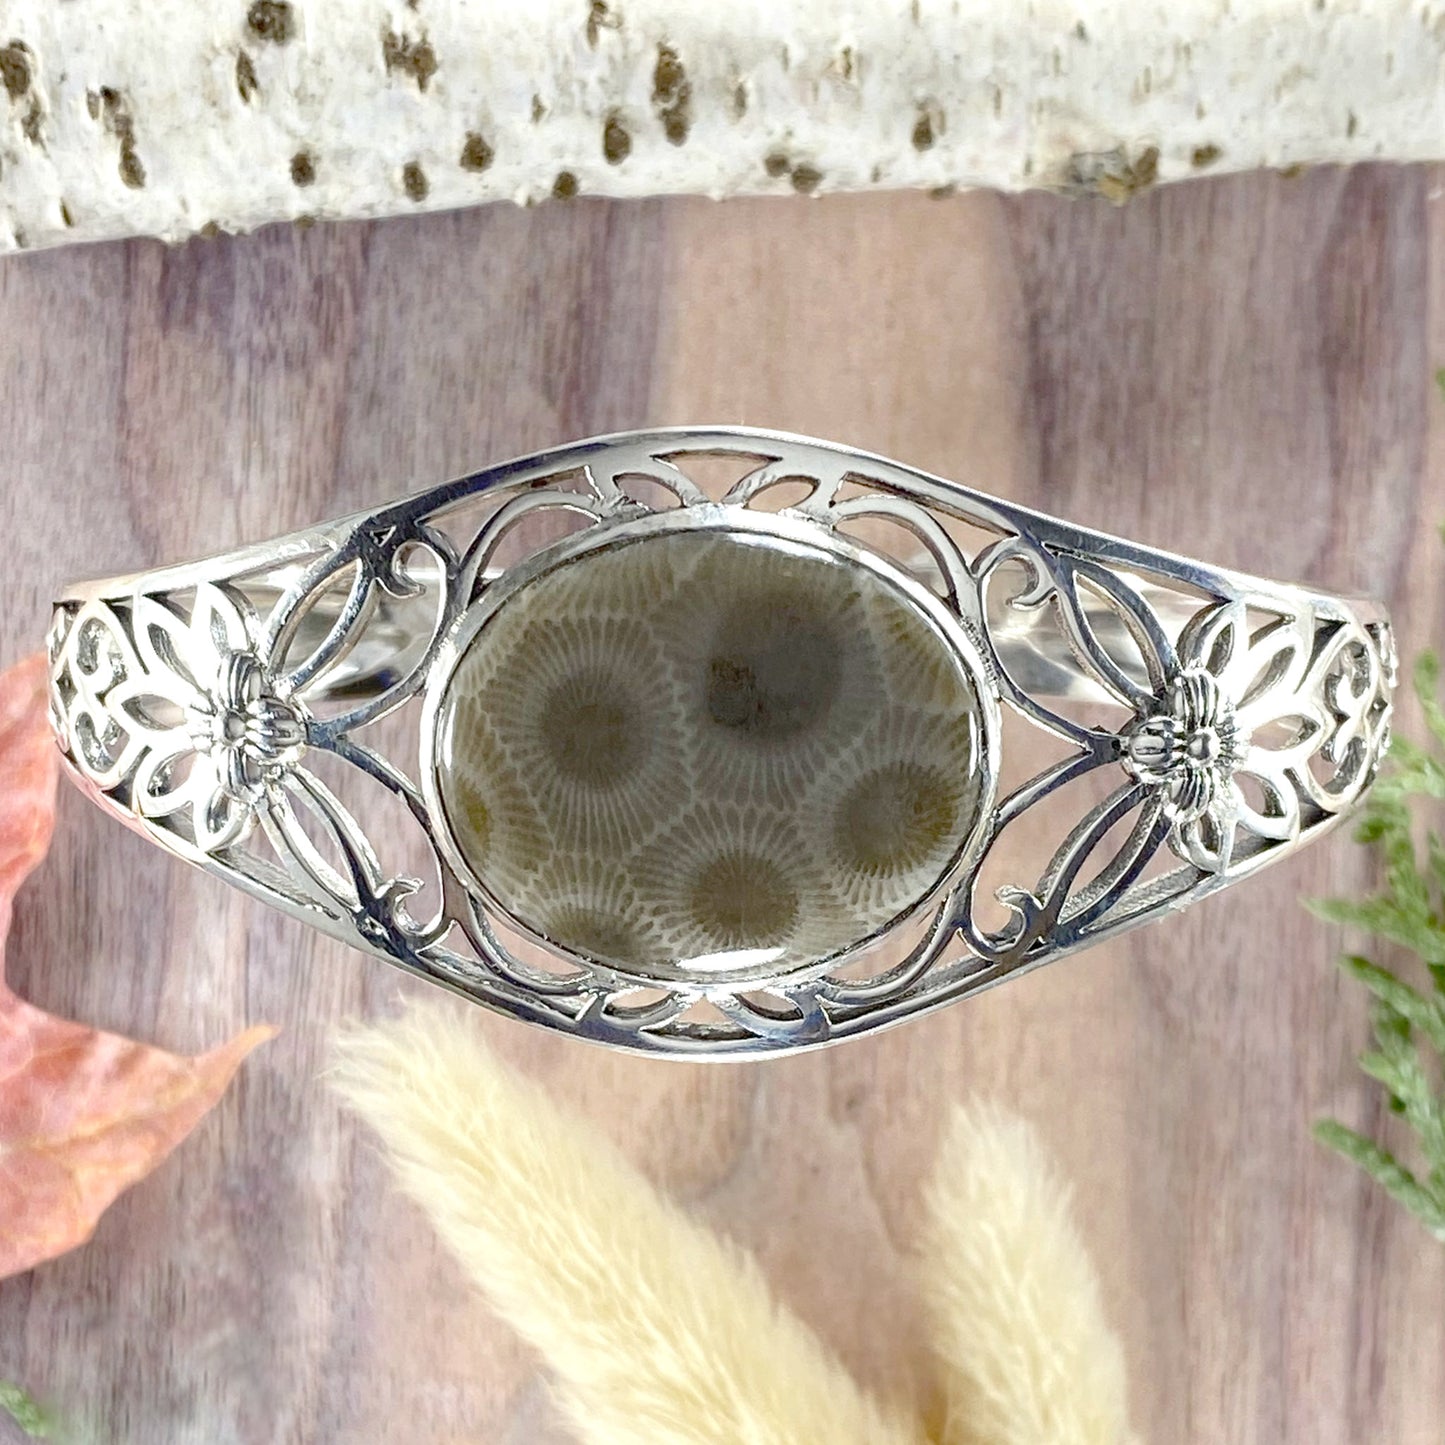 Petoskey Stone Cuff Bracelet Front View - Stone Treasures by the Lake